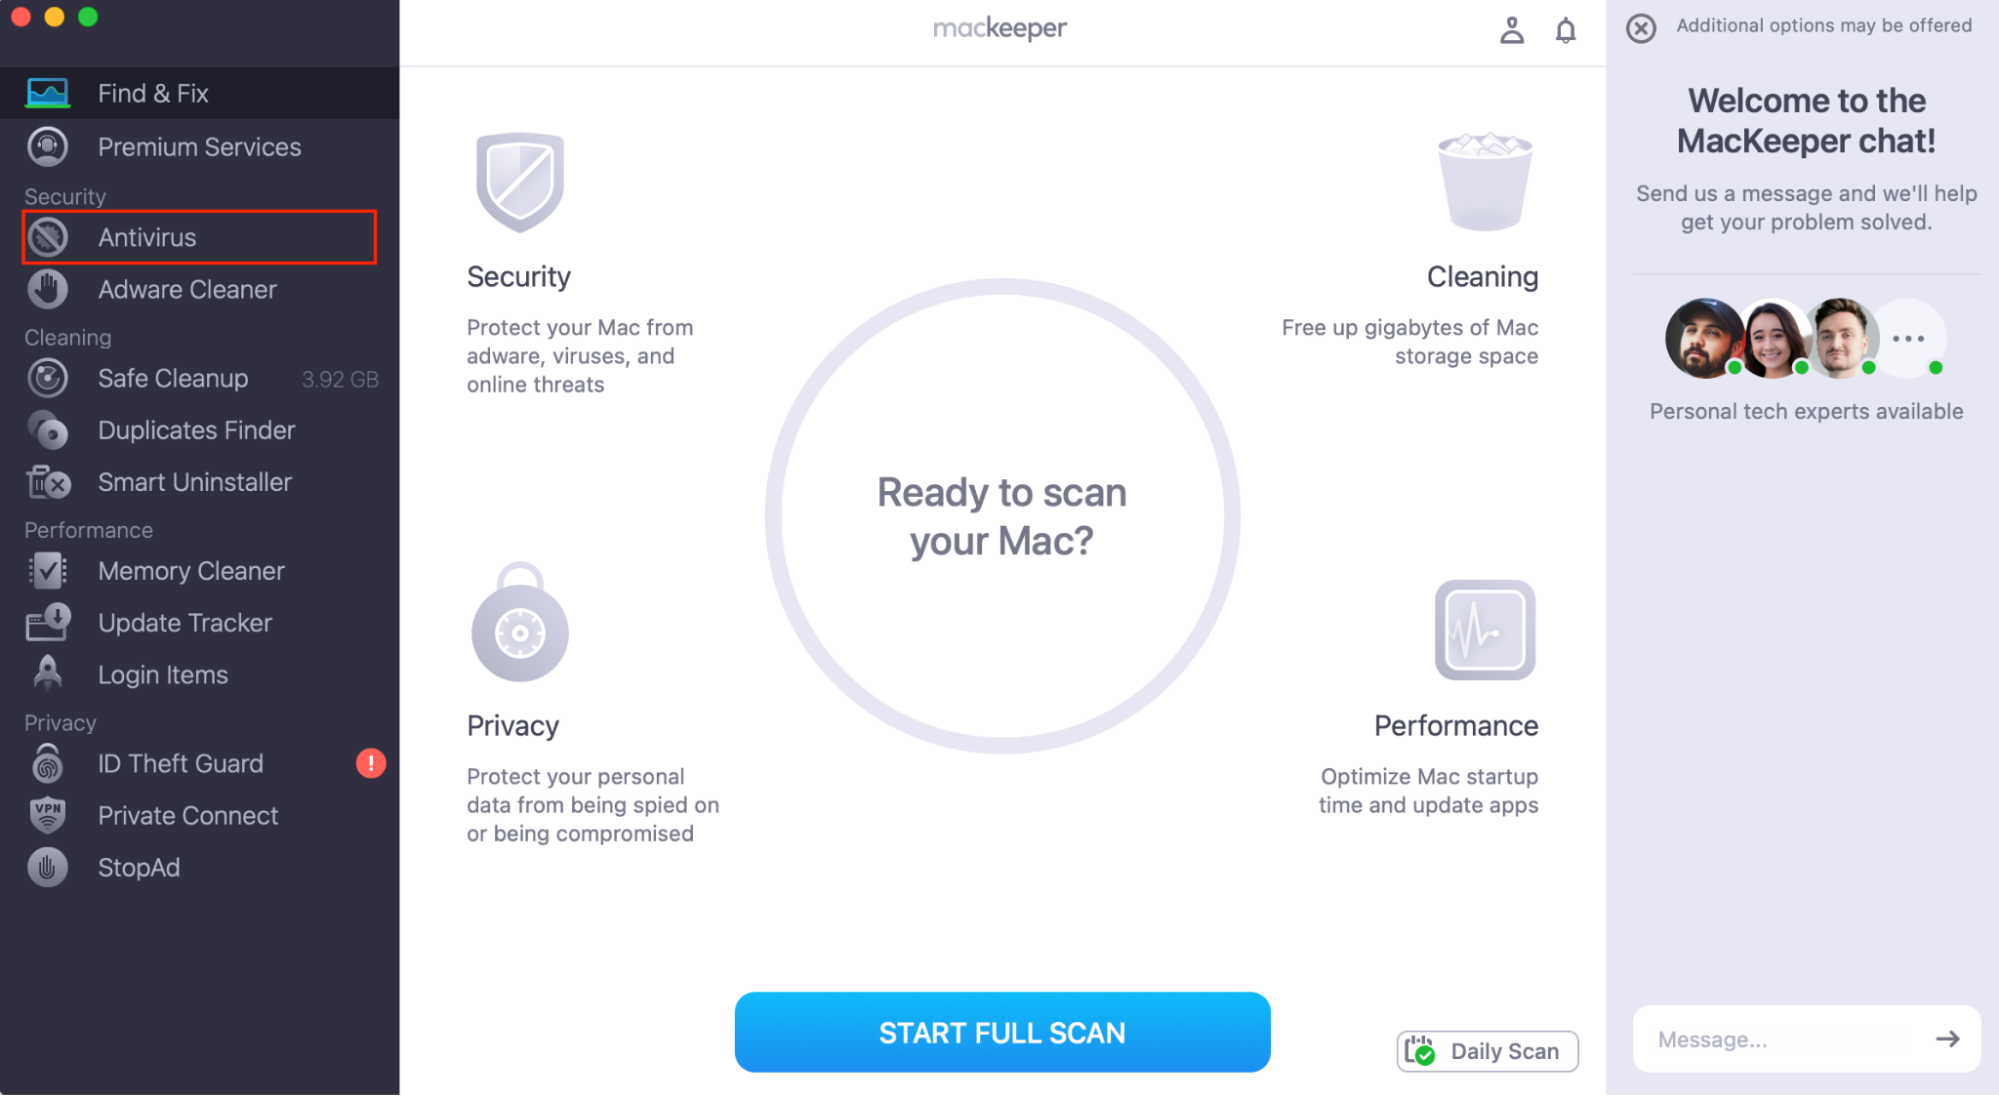 MacKeeper’s home screen, with Antivirus highlighted in the sidebar. How to Automatically get rid of browser hijackers from your MacBook via MacKeeper.